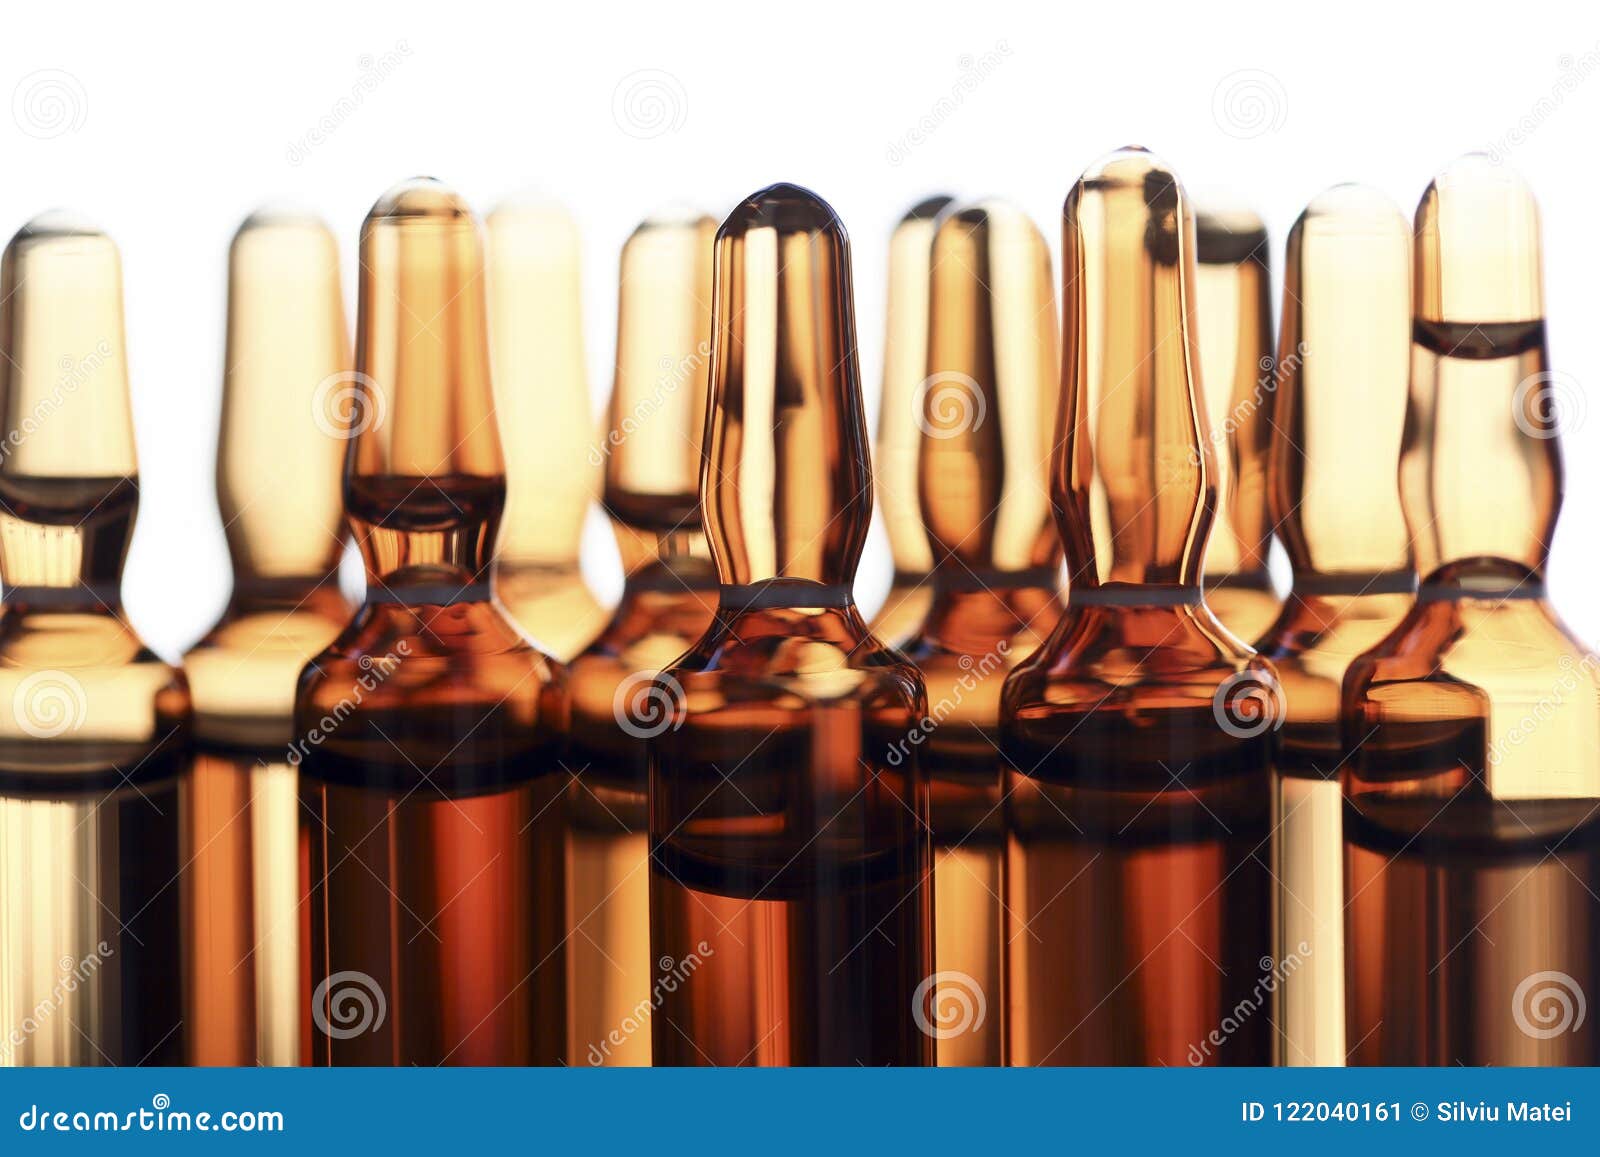 ampoules of glass with vaccine photographed in white light.